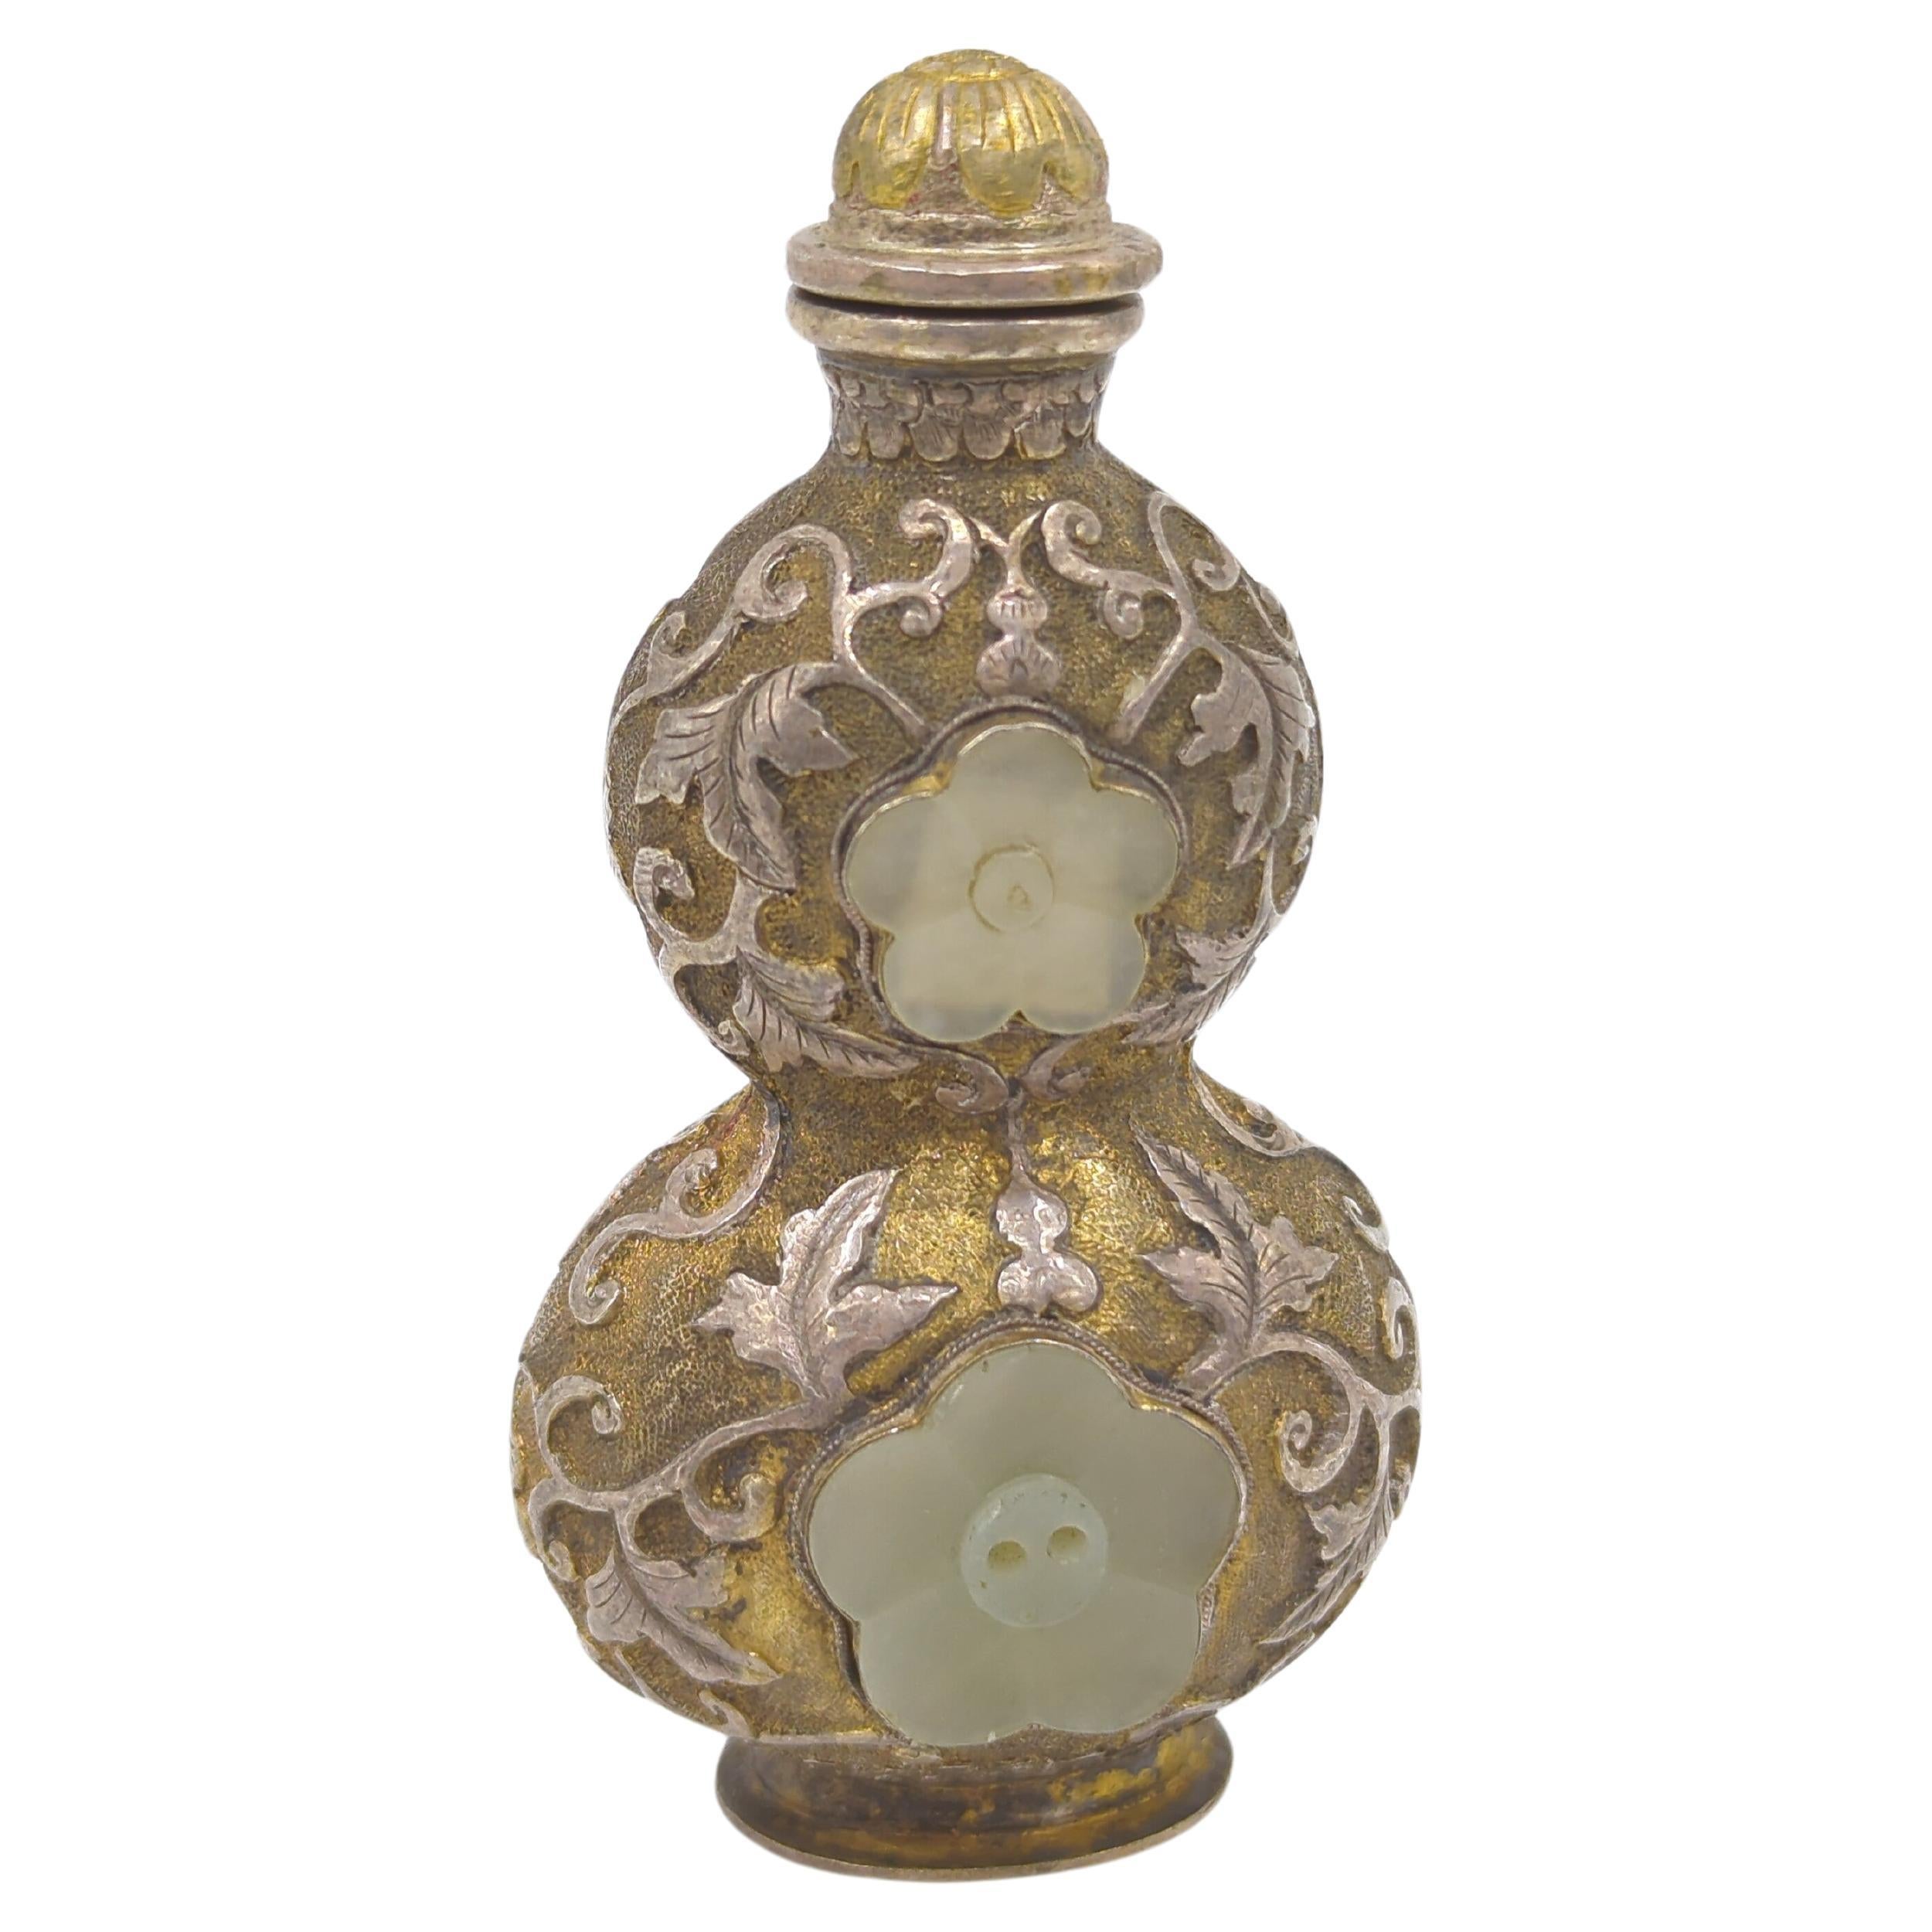 Fine antique Chinese Qing Dynasty silvered golden copper alloy snuff bottle of hulu double gourd form, inset with 4x carved five petal white jade plum flowers, body decorated with scrolling foliage and ruyi head border in relief above the raised